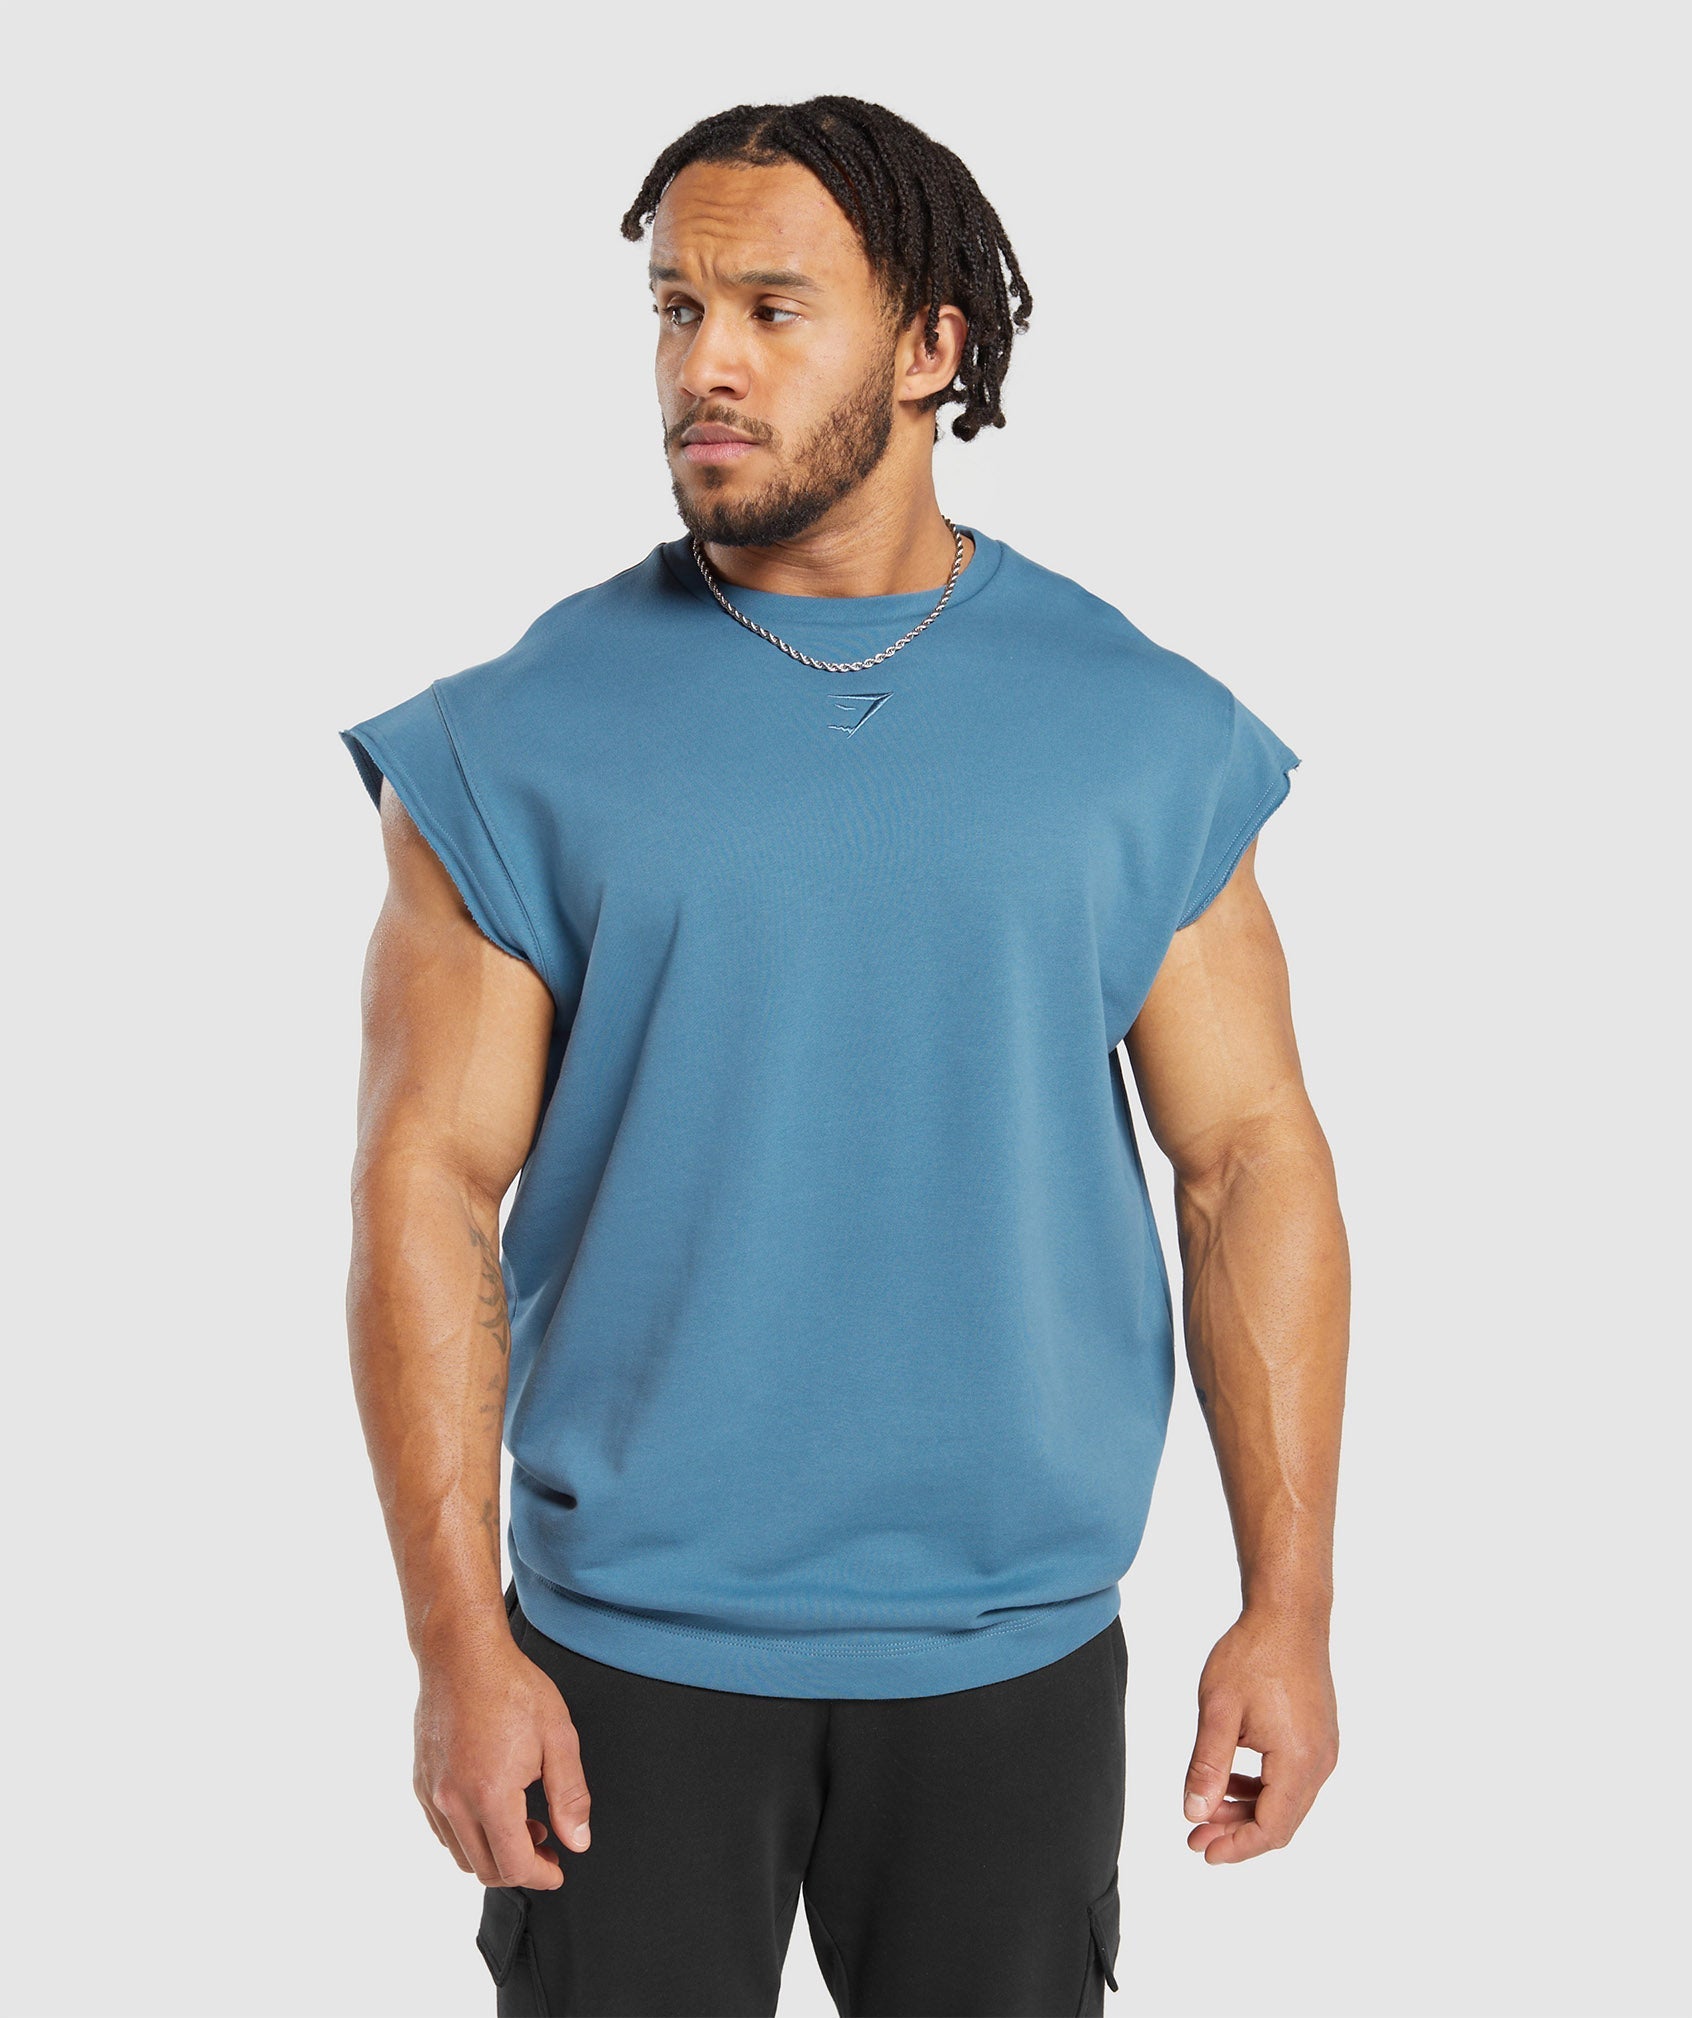 Super Natural Cut Off T-Shirt in Faded Blue - view 1